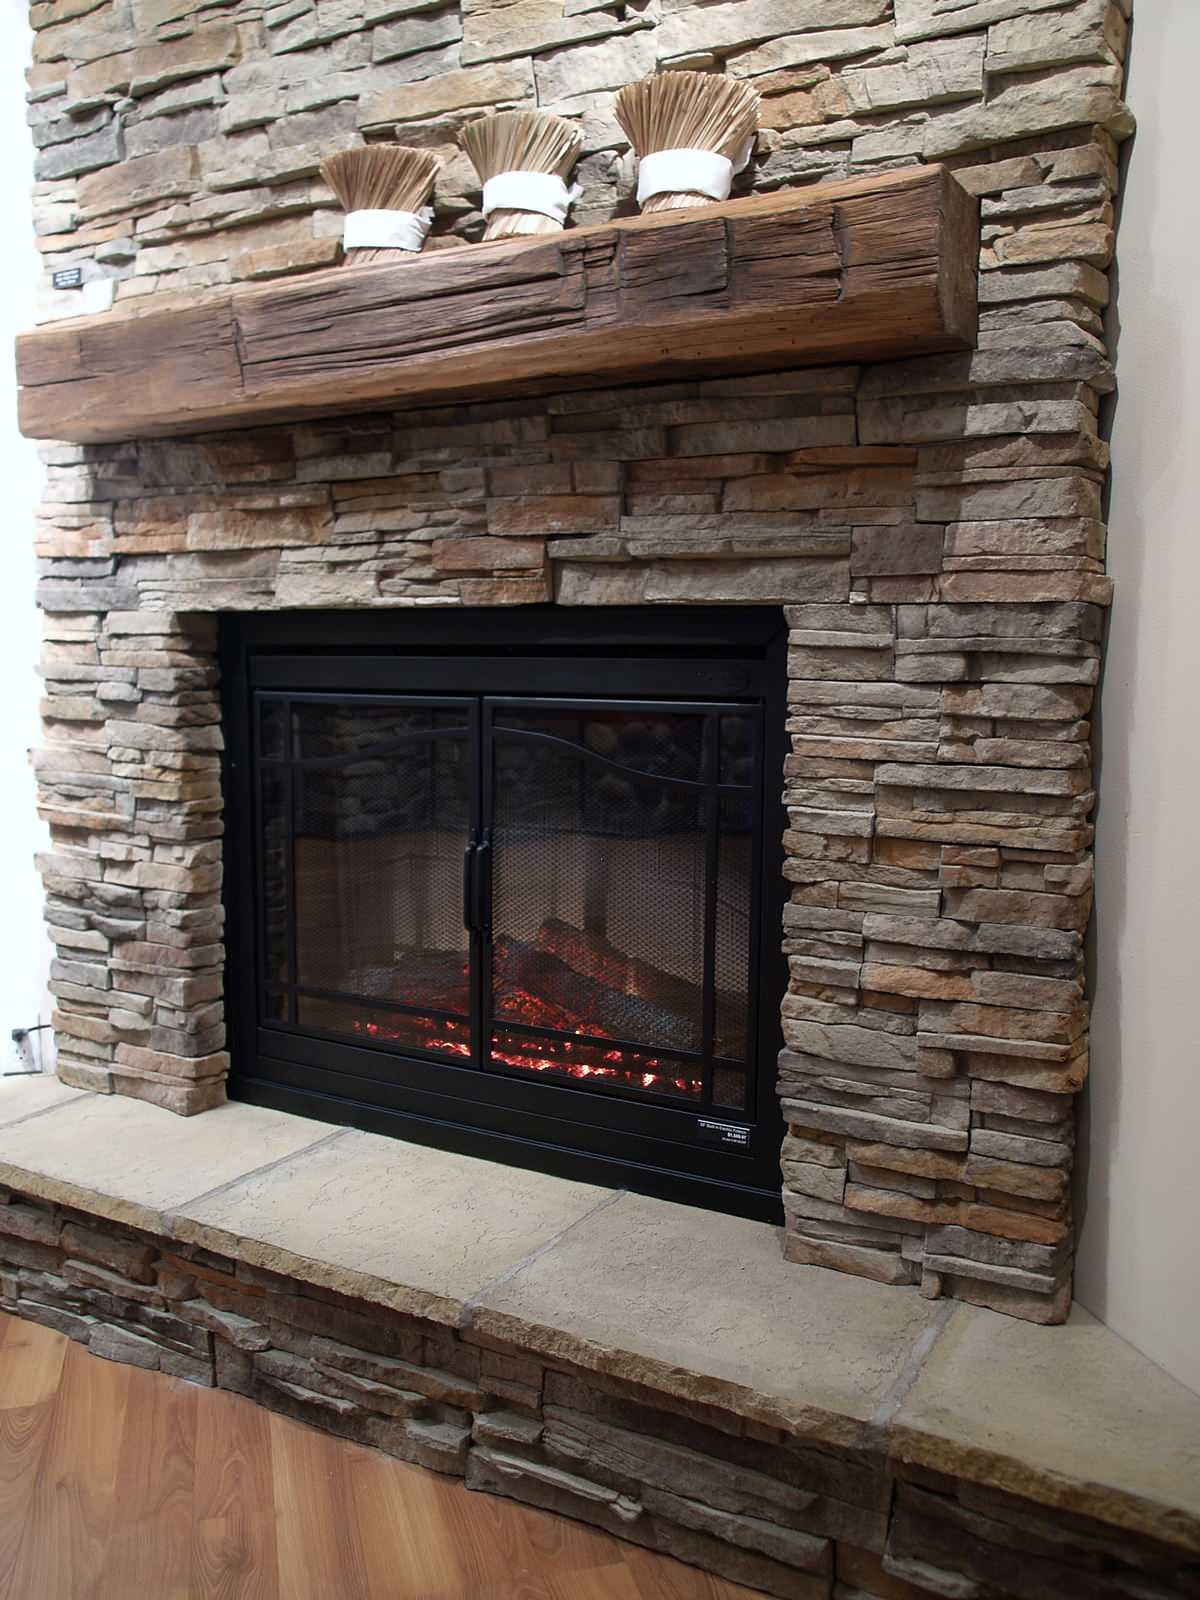 Faux Stone Fireplace Houzz, Faux Stone Fireplace Remodel